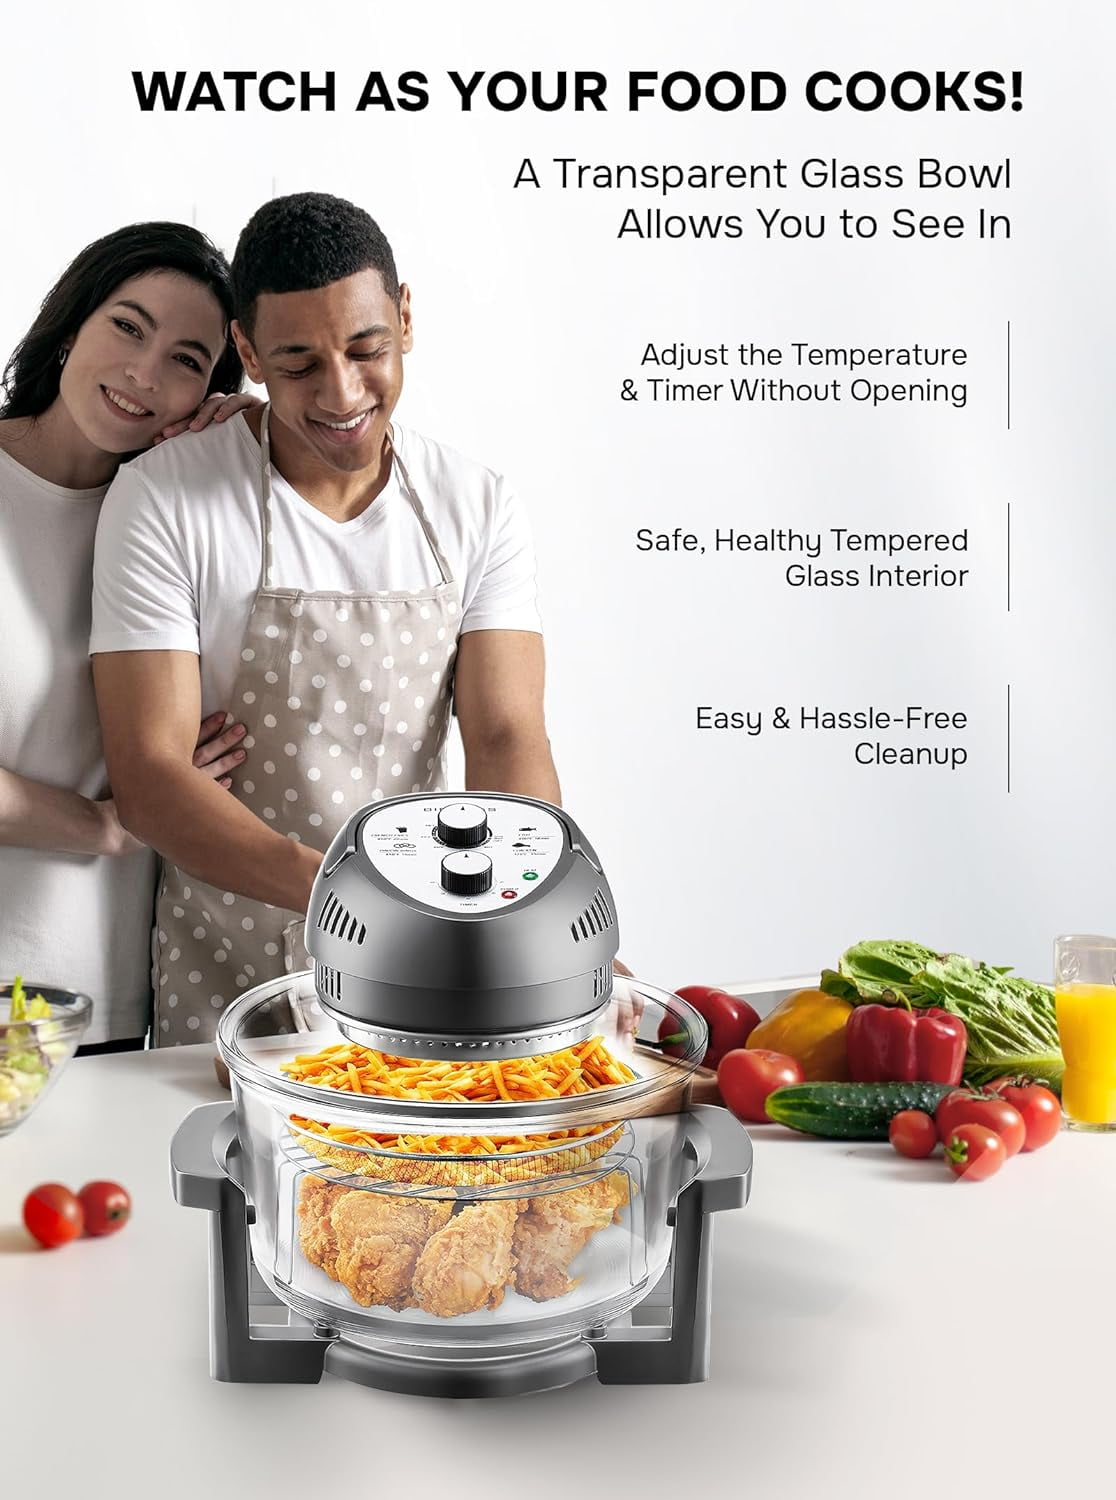 Big Boss 16Qt Large Air Fryer Oven with 50+ Recipe Book AirFryer Oven Makes  Healthier Crispy Foods Gray